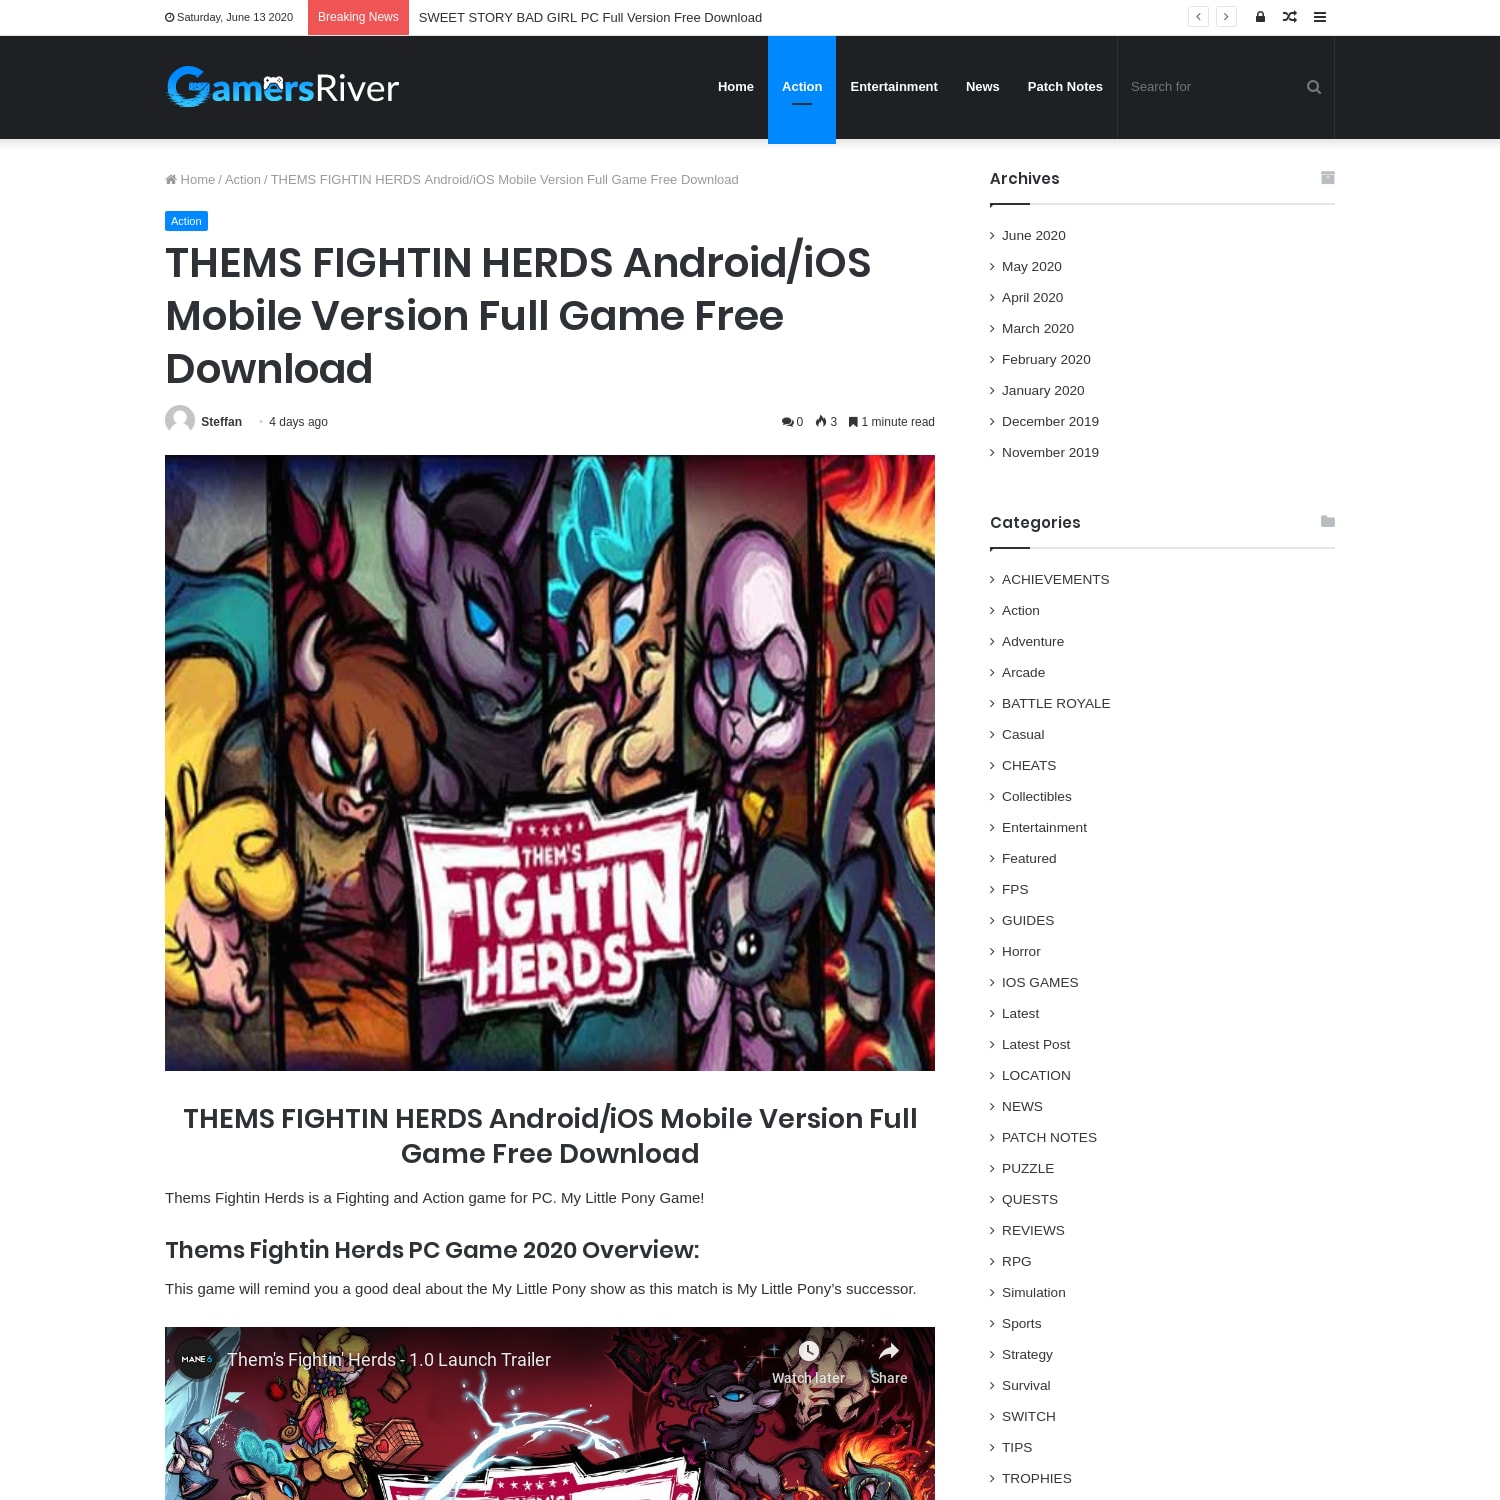 THEMS FIGHTIN HERDS Android/iOS Mobile Version Full Game Free Download